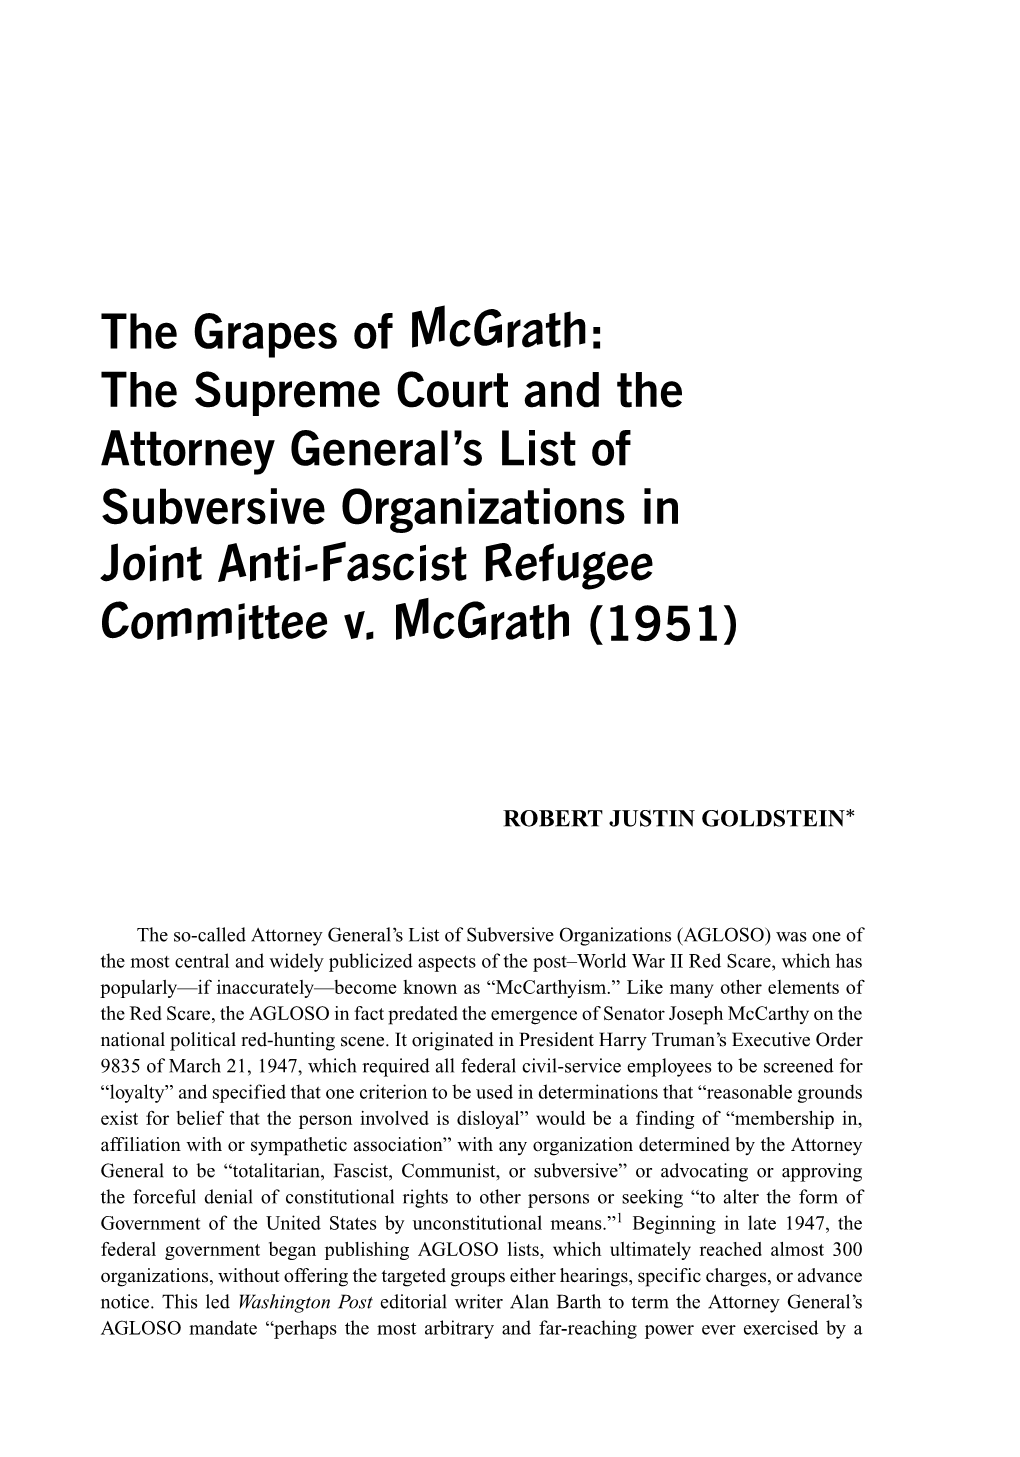 The Grapes of Mcgrath: the Supreme Court and the Attorney General's